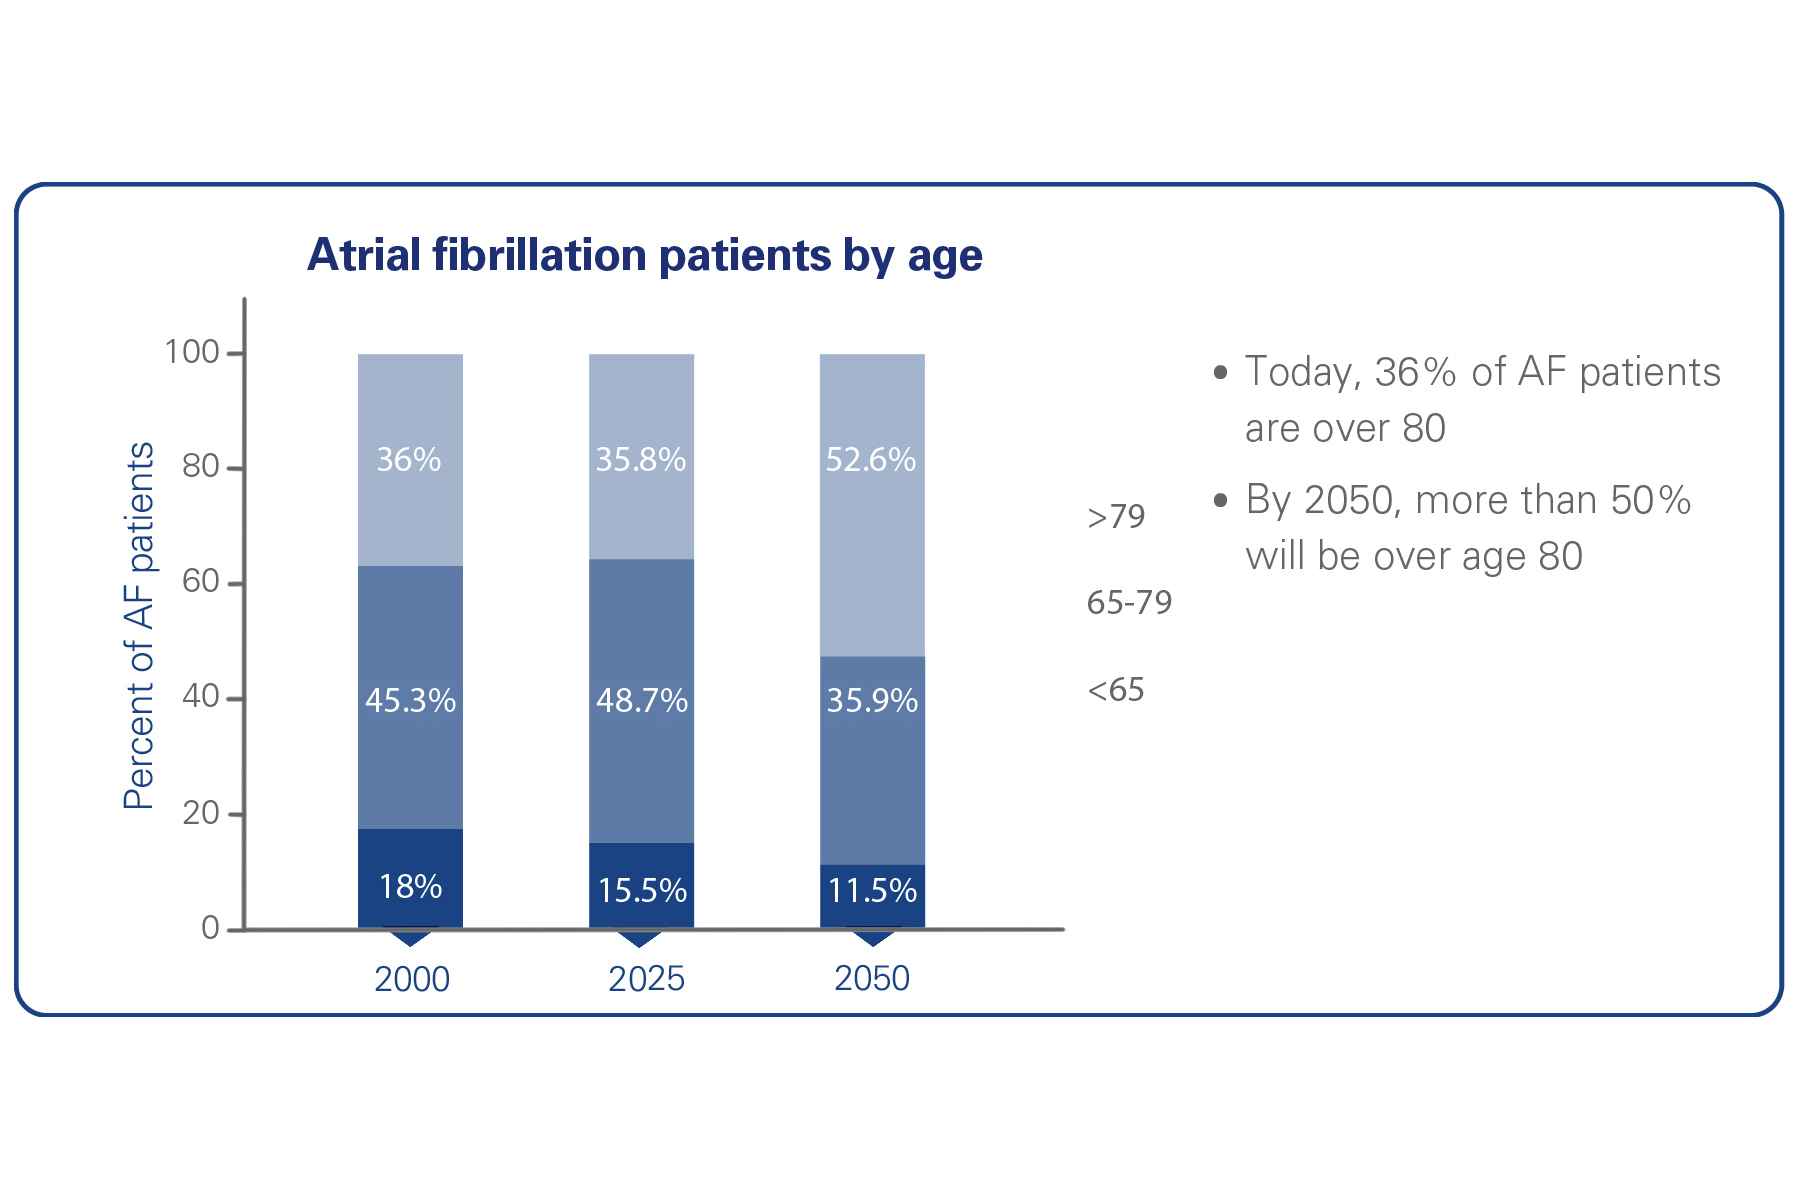 BSC_Watchman_AF_patients_by_age_Backgrounder_picture2_EN_thumb.jpg